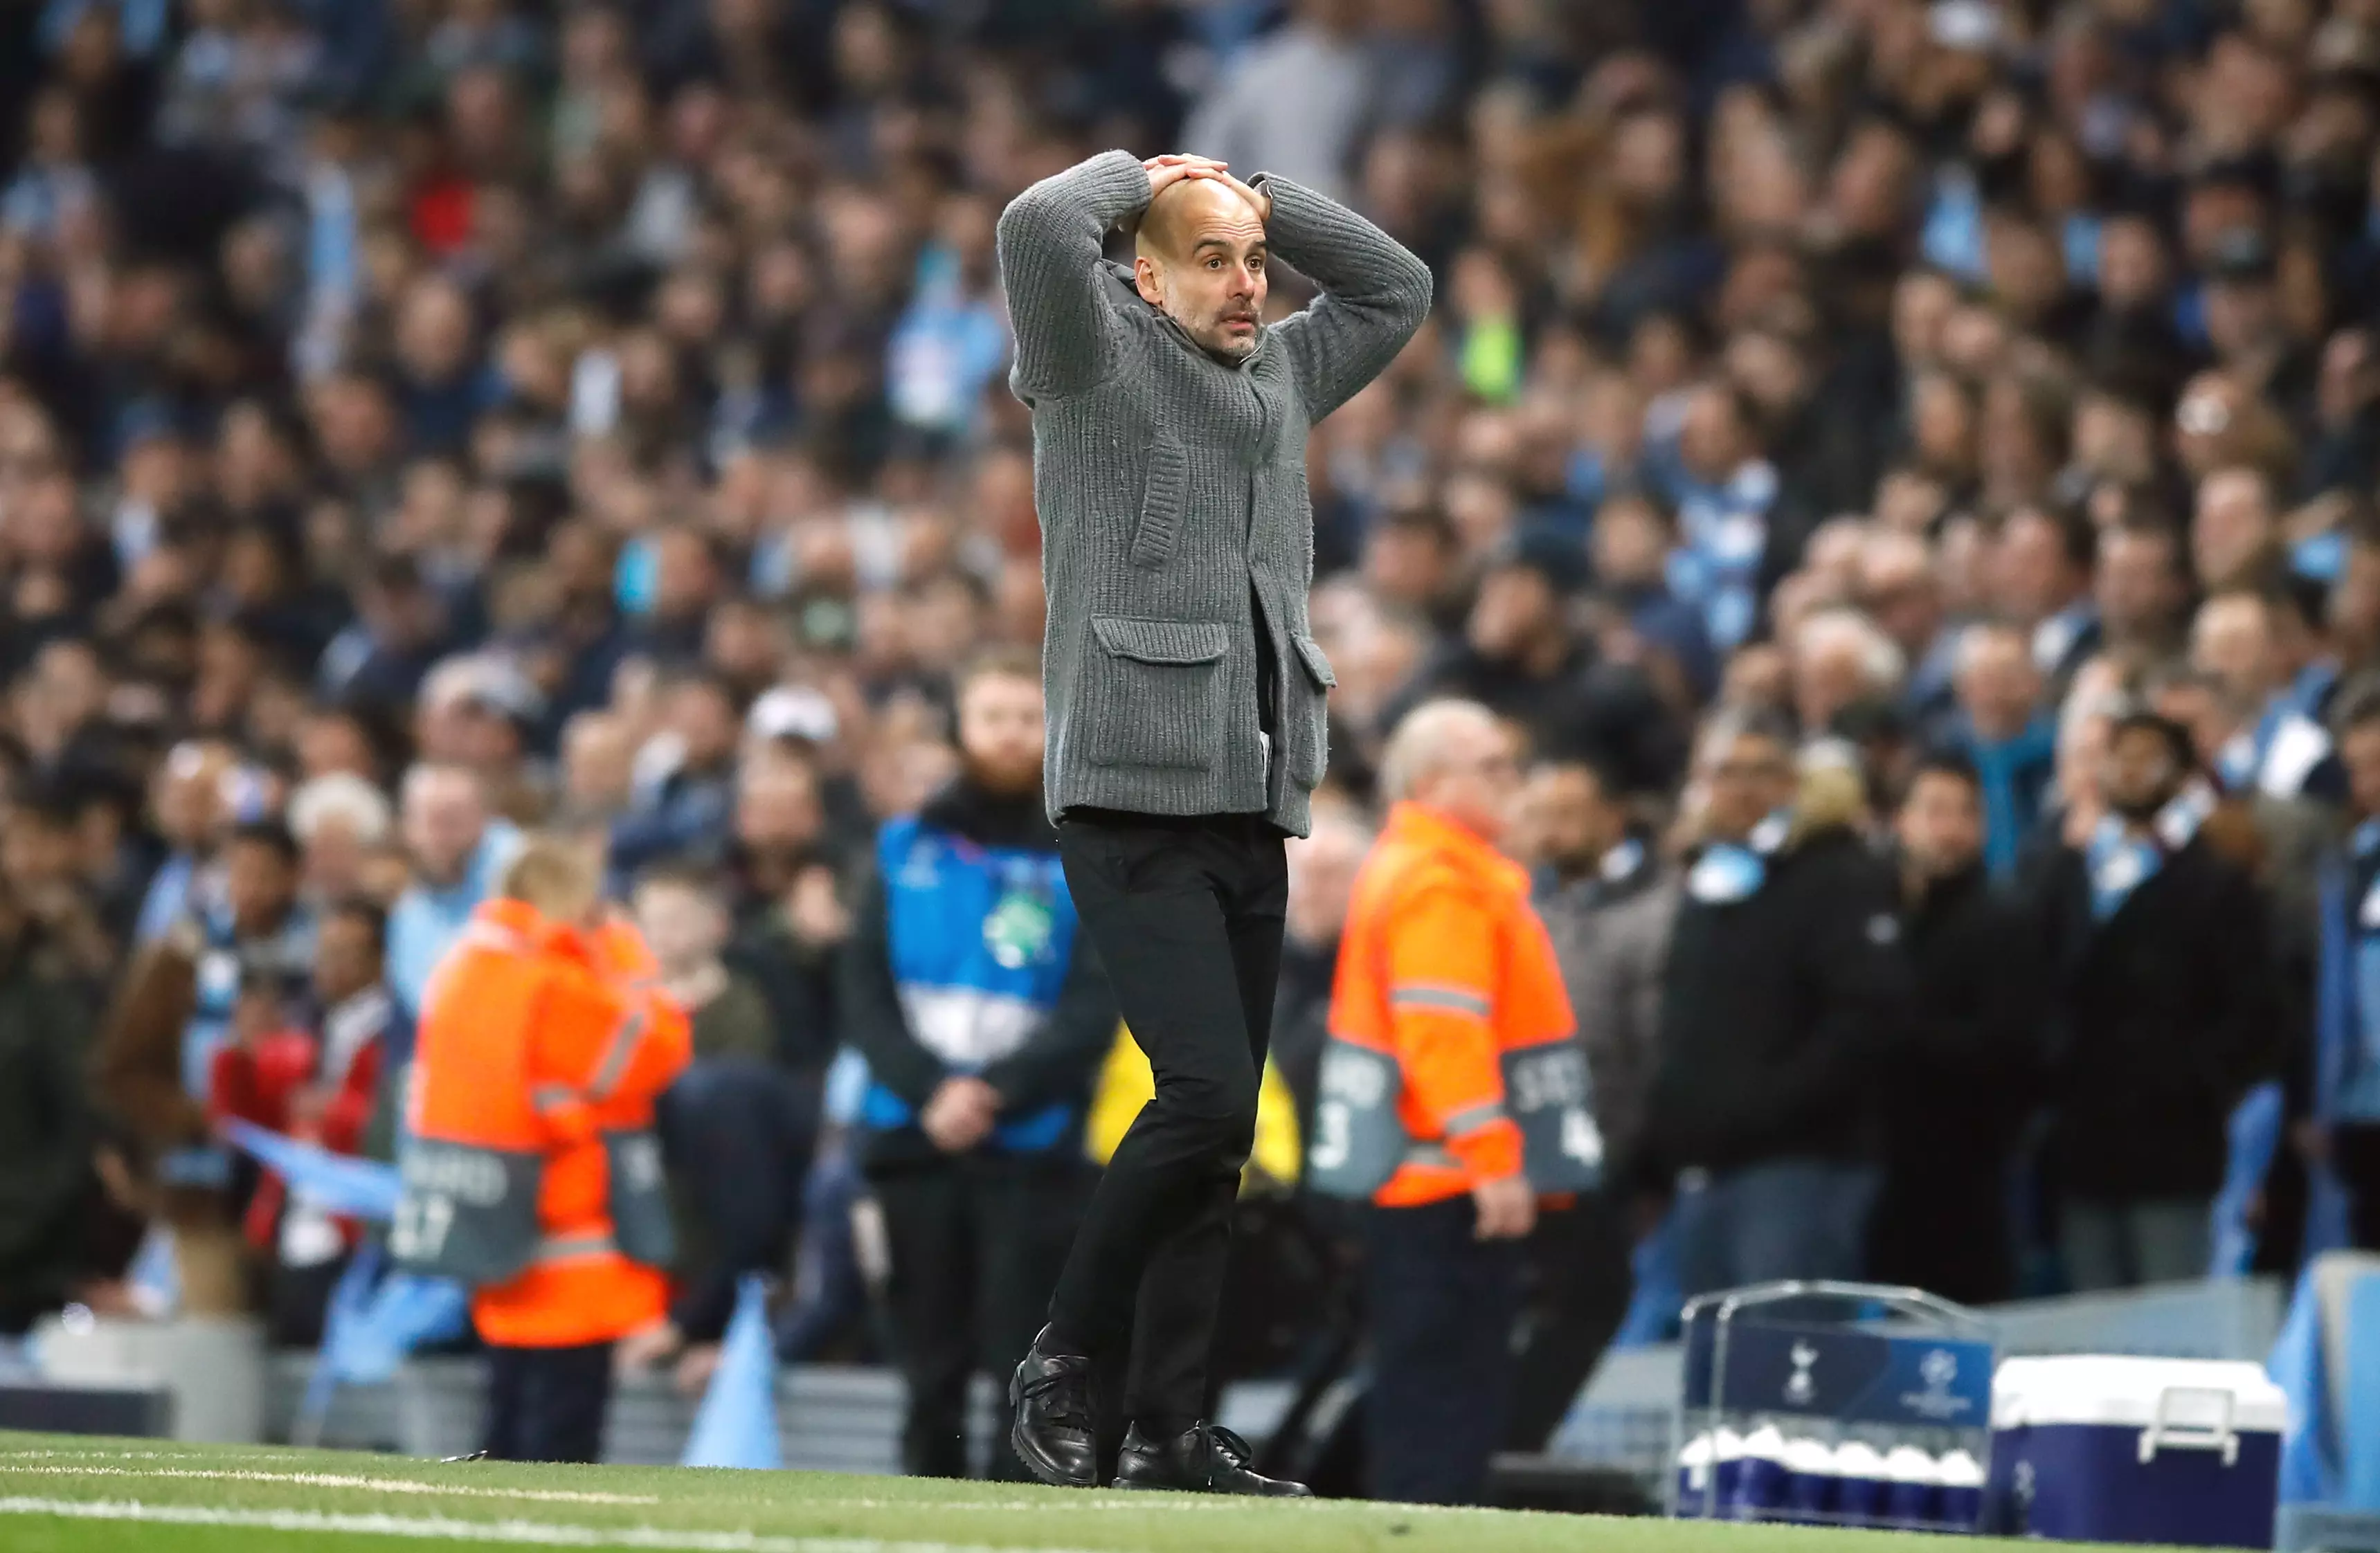 Guardiola wouldn't be able to believe his side had been banned. Image: PA Images